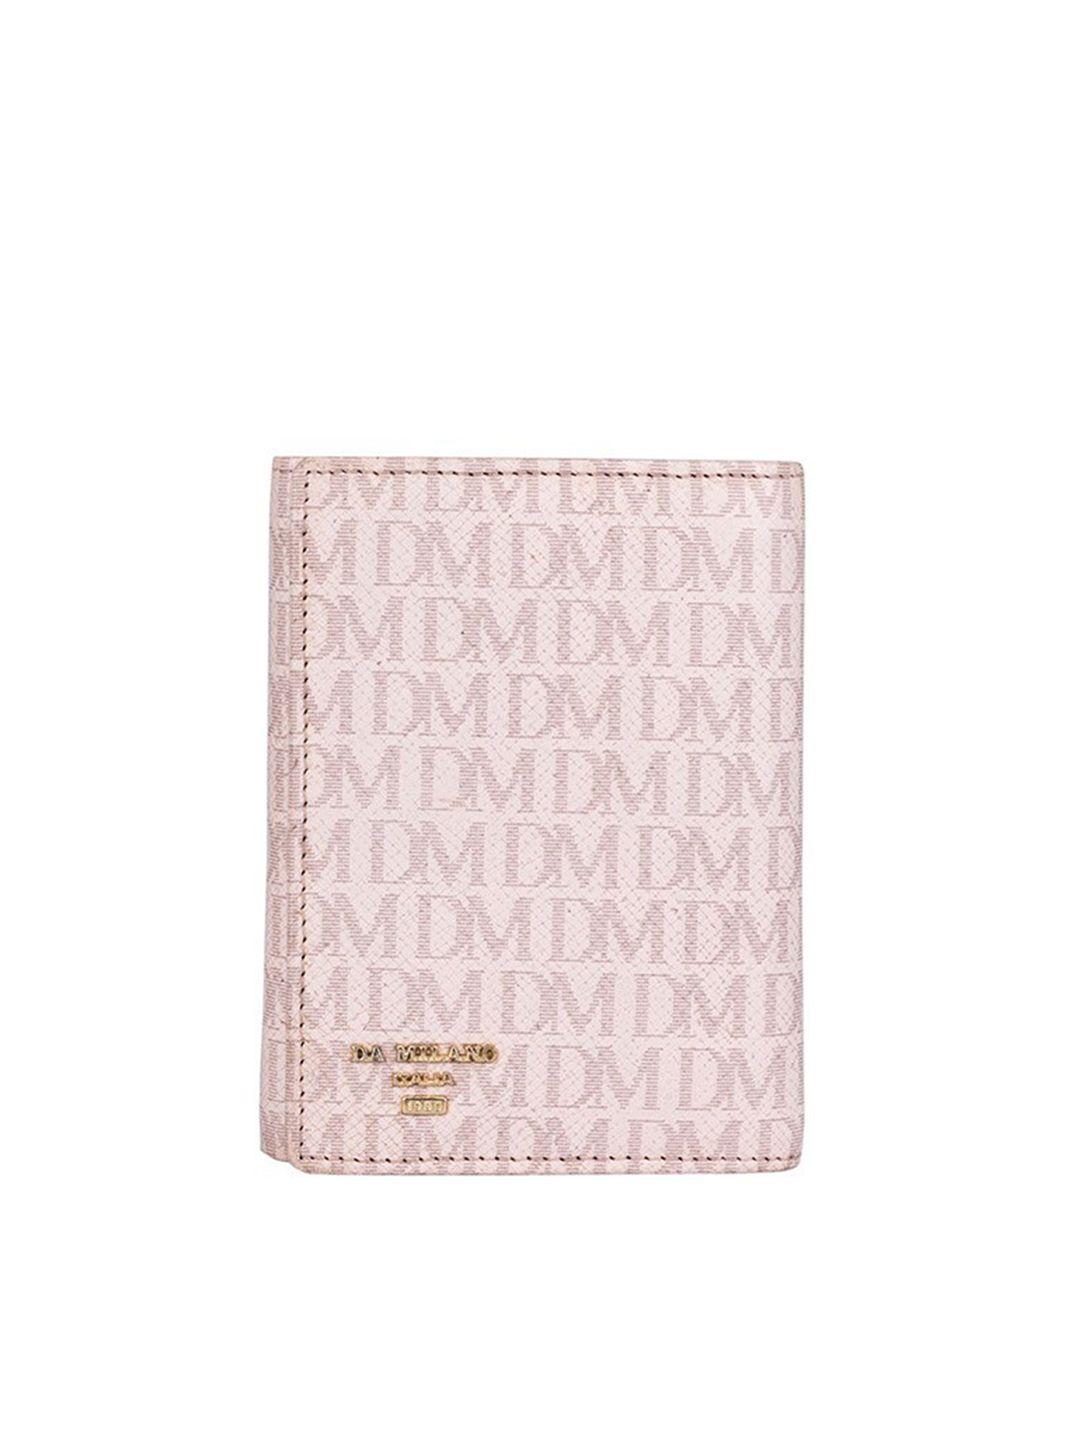 da milano women typography printed leather two fold wallet